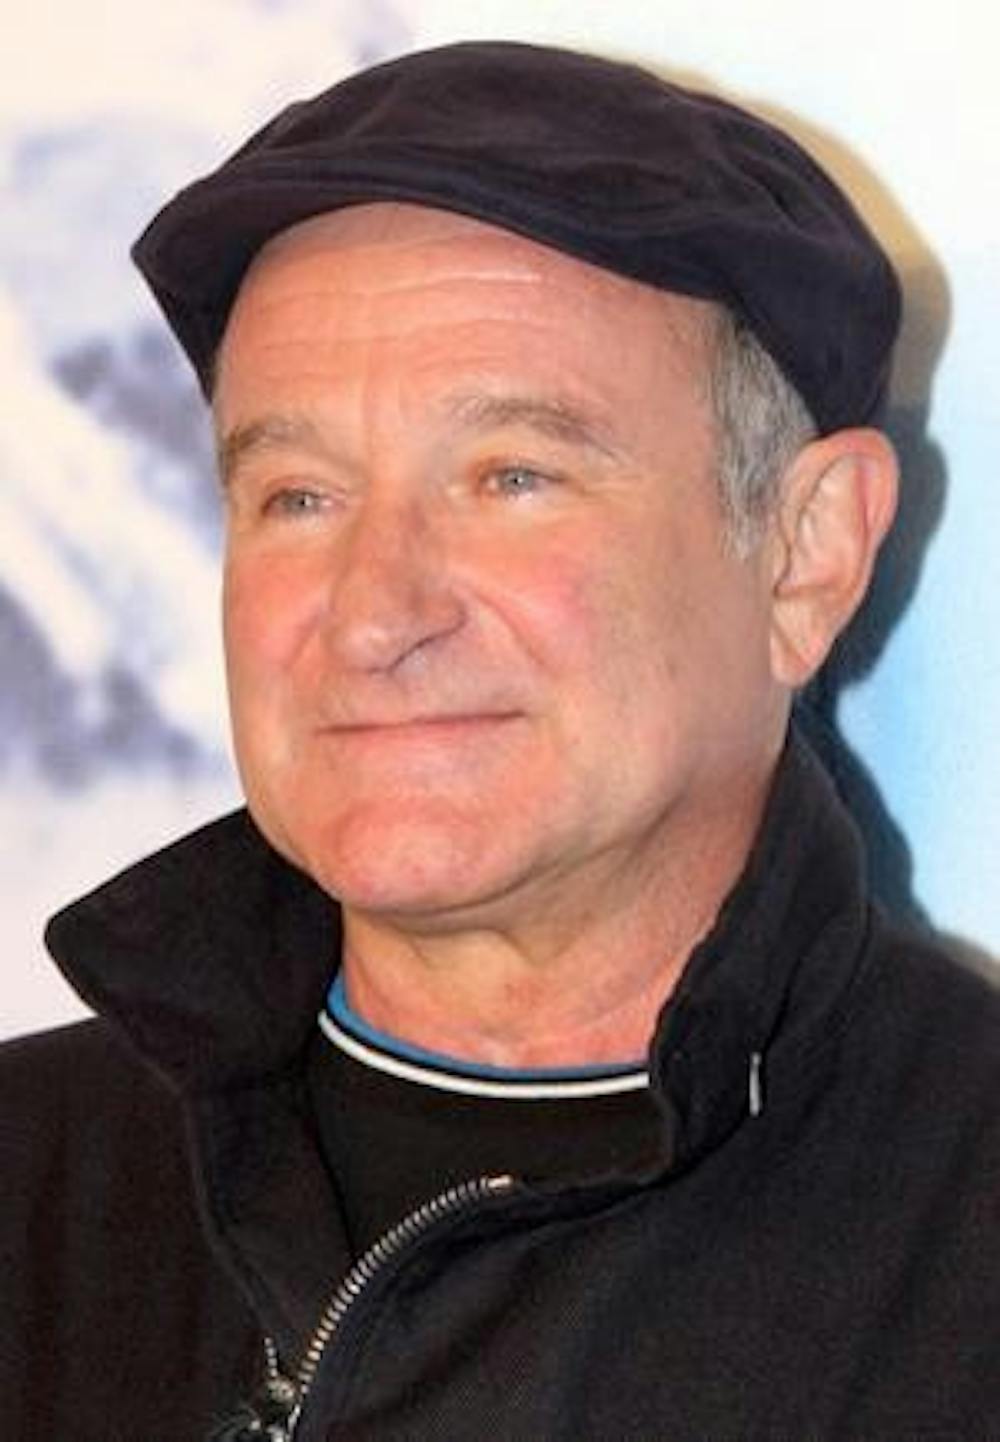 <p><strong>Robin Williams</strong> was found dead at age 63. The actor is famous for his roles in "Mrs. Doubtfire," "Dead Poets Society" and "Good Will Hunting." <strong>PHOTO COURTESY OF WIKIPEDIA.ORG</strong></p>